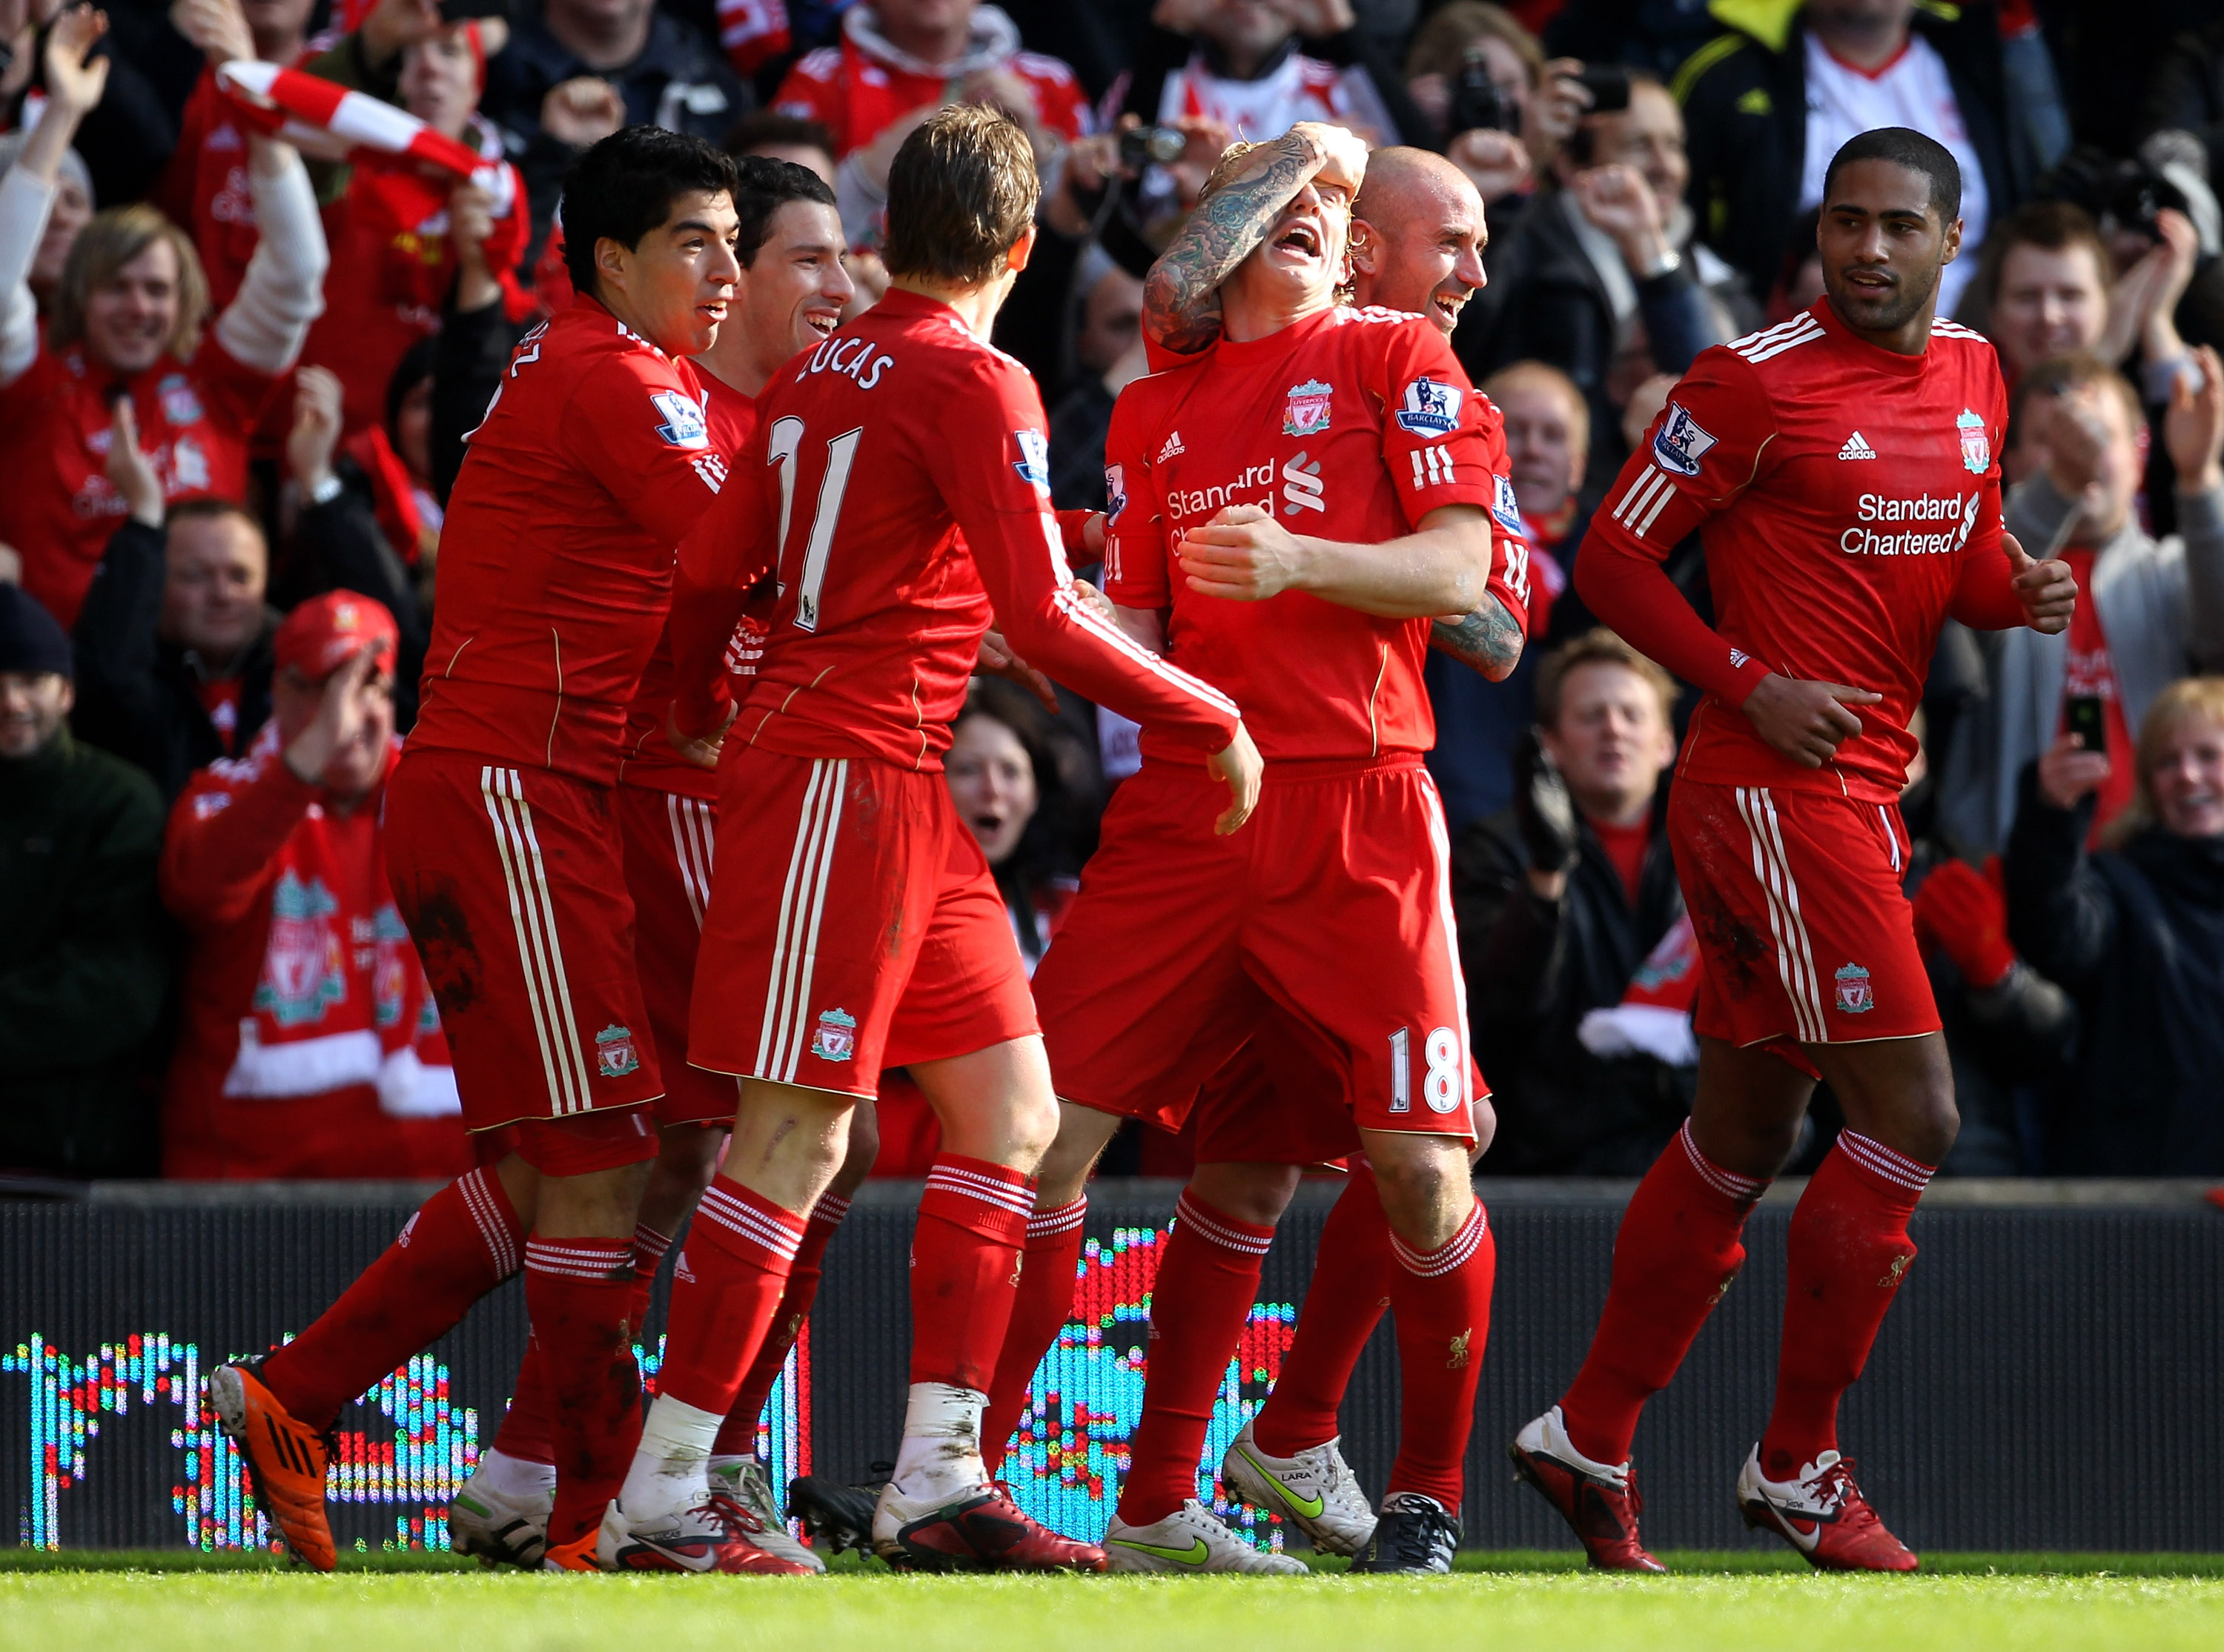 LIVERPOOL, ENGLAND - MARCH 06:  Dirk Kuyt of Liverpool celebrates scoring the opening goal with his team mates during the Barclays Premier League match between Liverpool and Manchester United at Anfield on March 6, 2011 in Liverpool, England.  (Photo by A